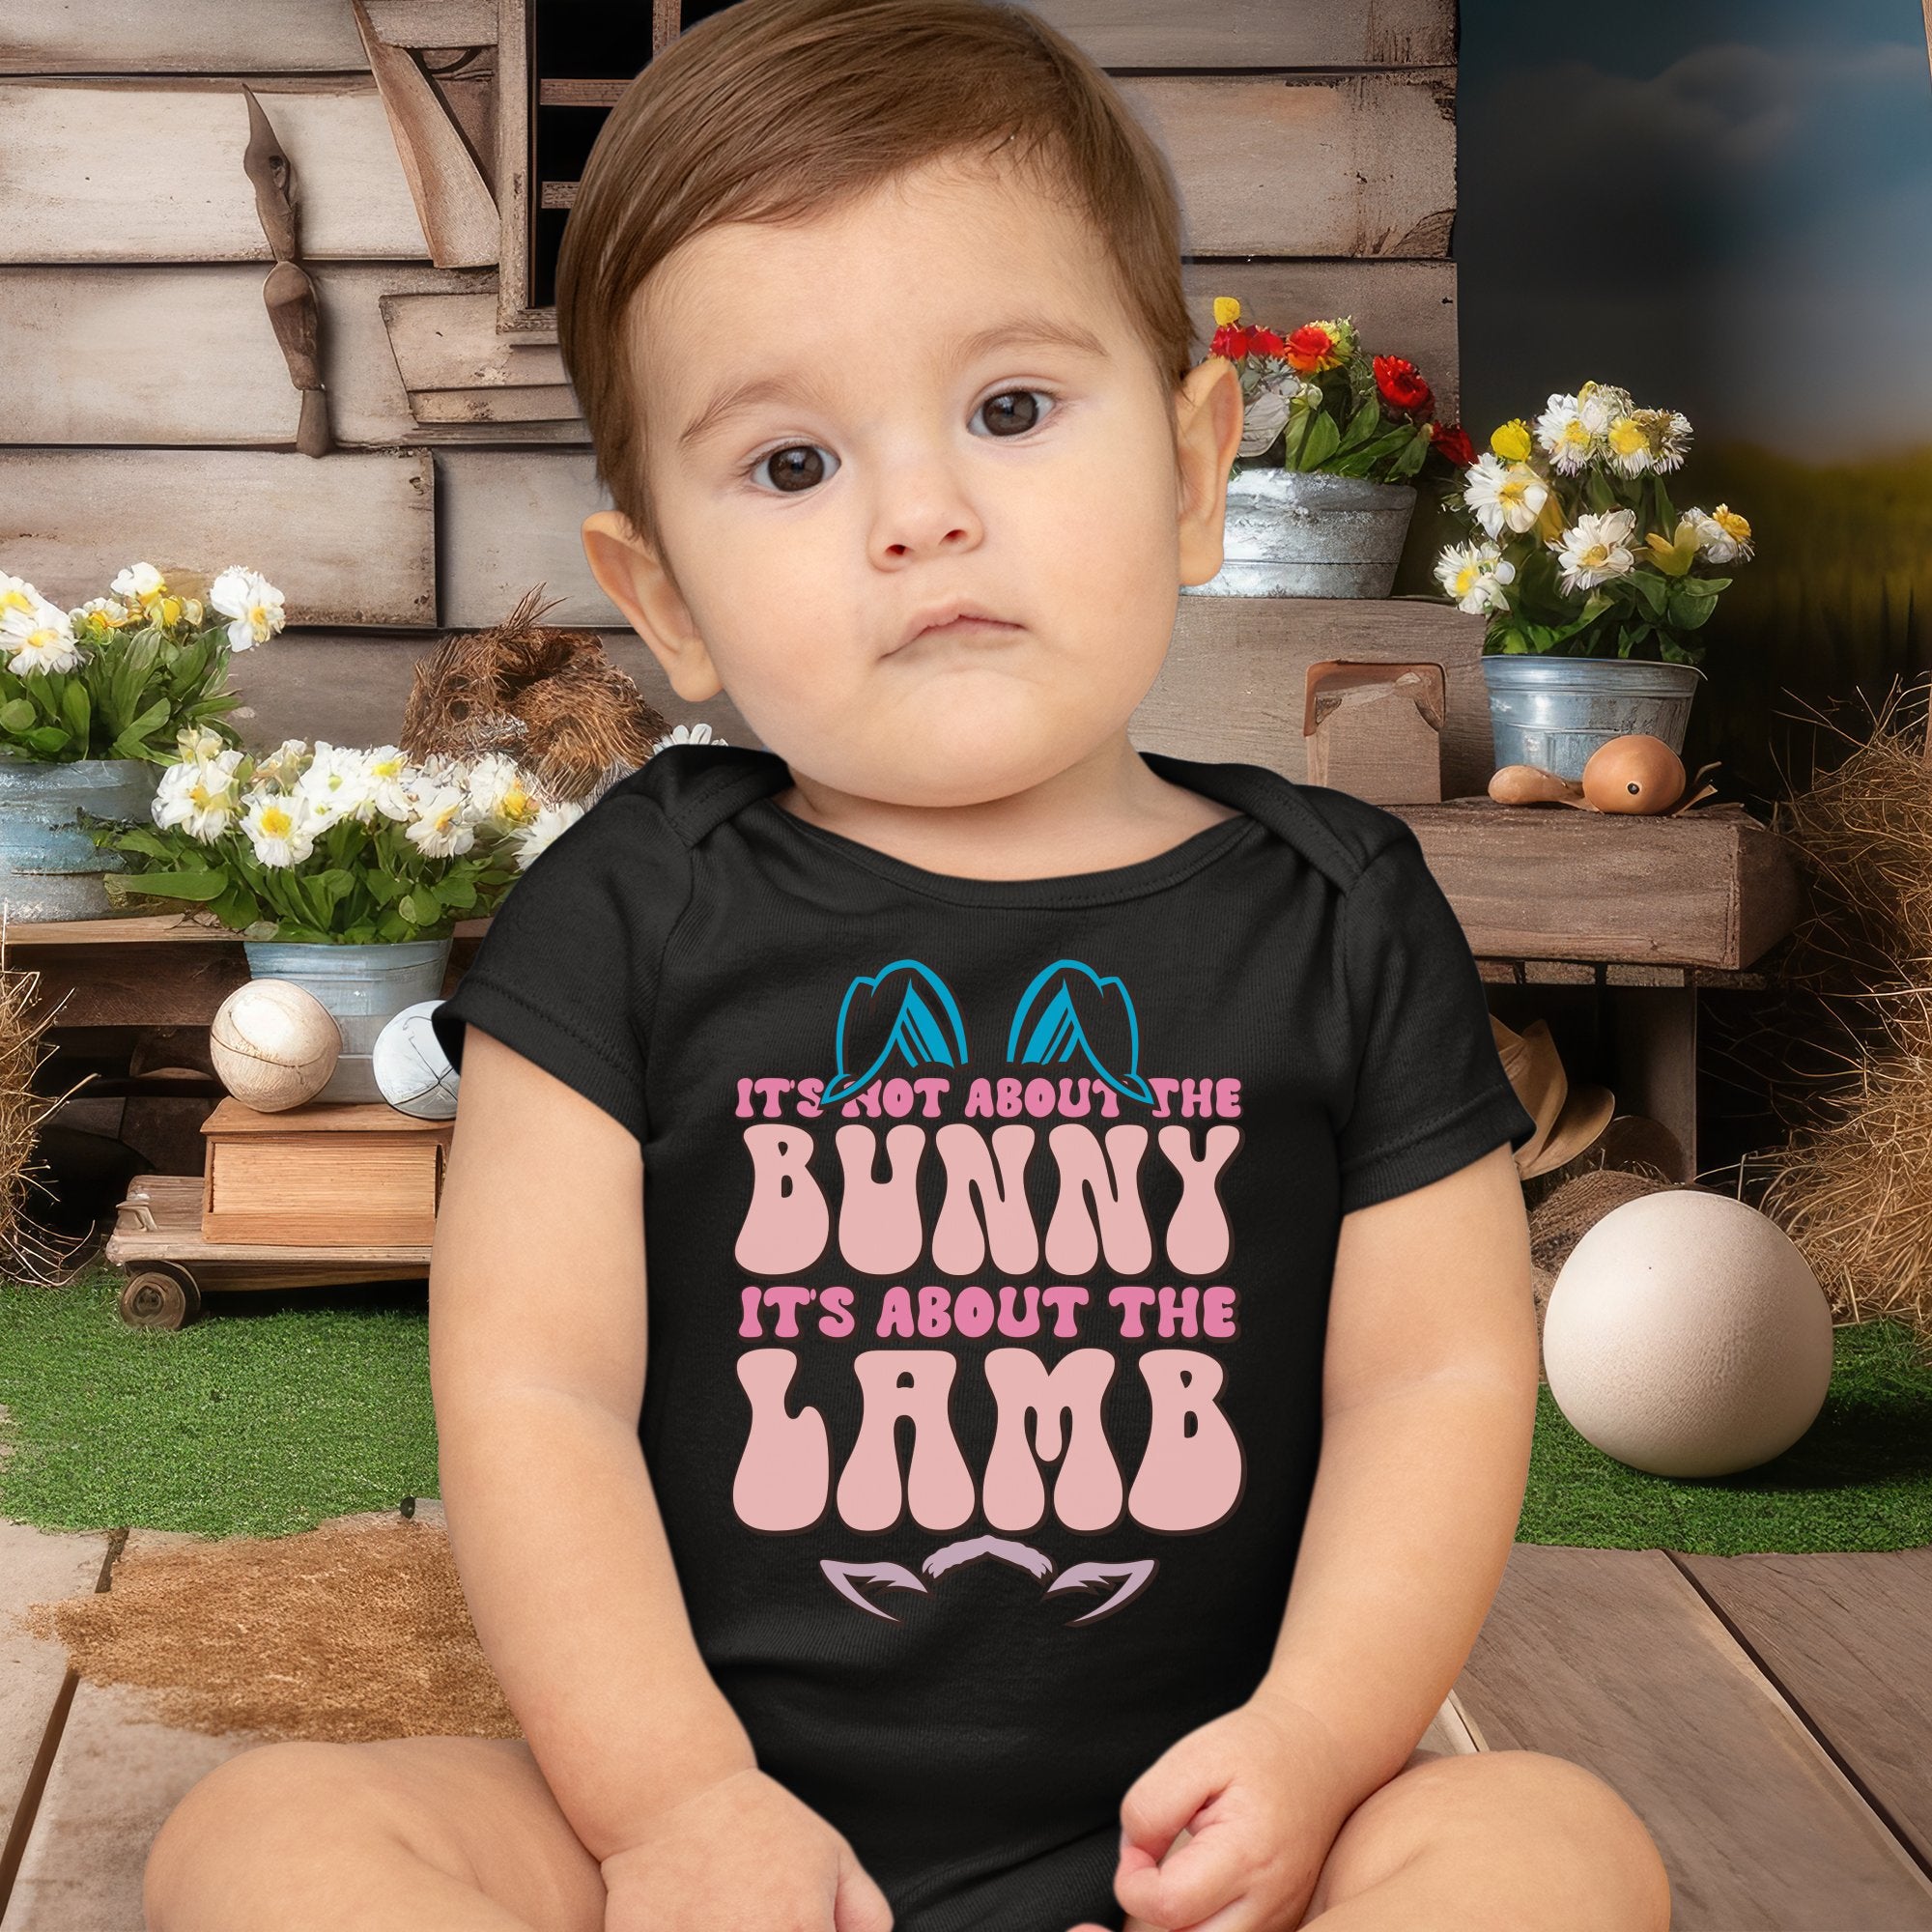 Not About the Bunny Infant Fine Jersey Bodysuit Size: 18mo Color: Navy Jesus Passion Apparel